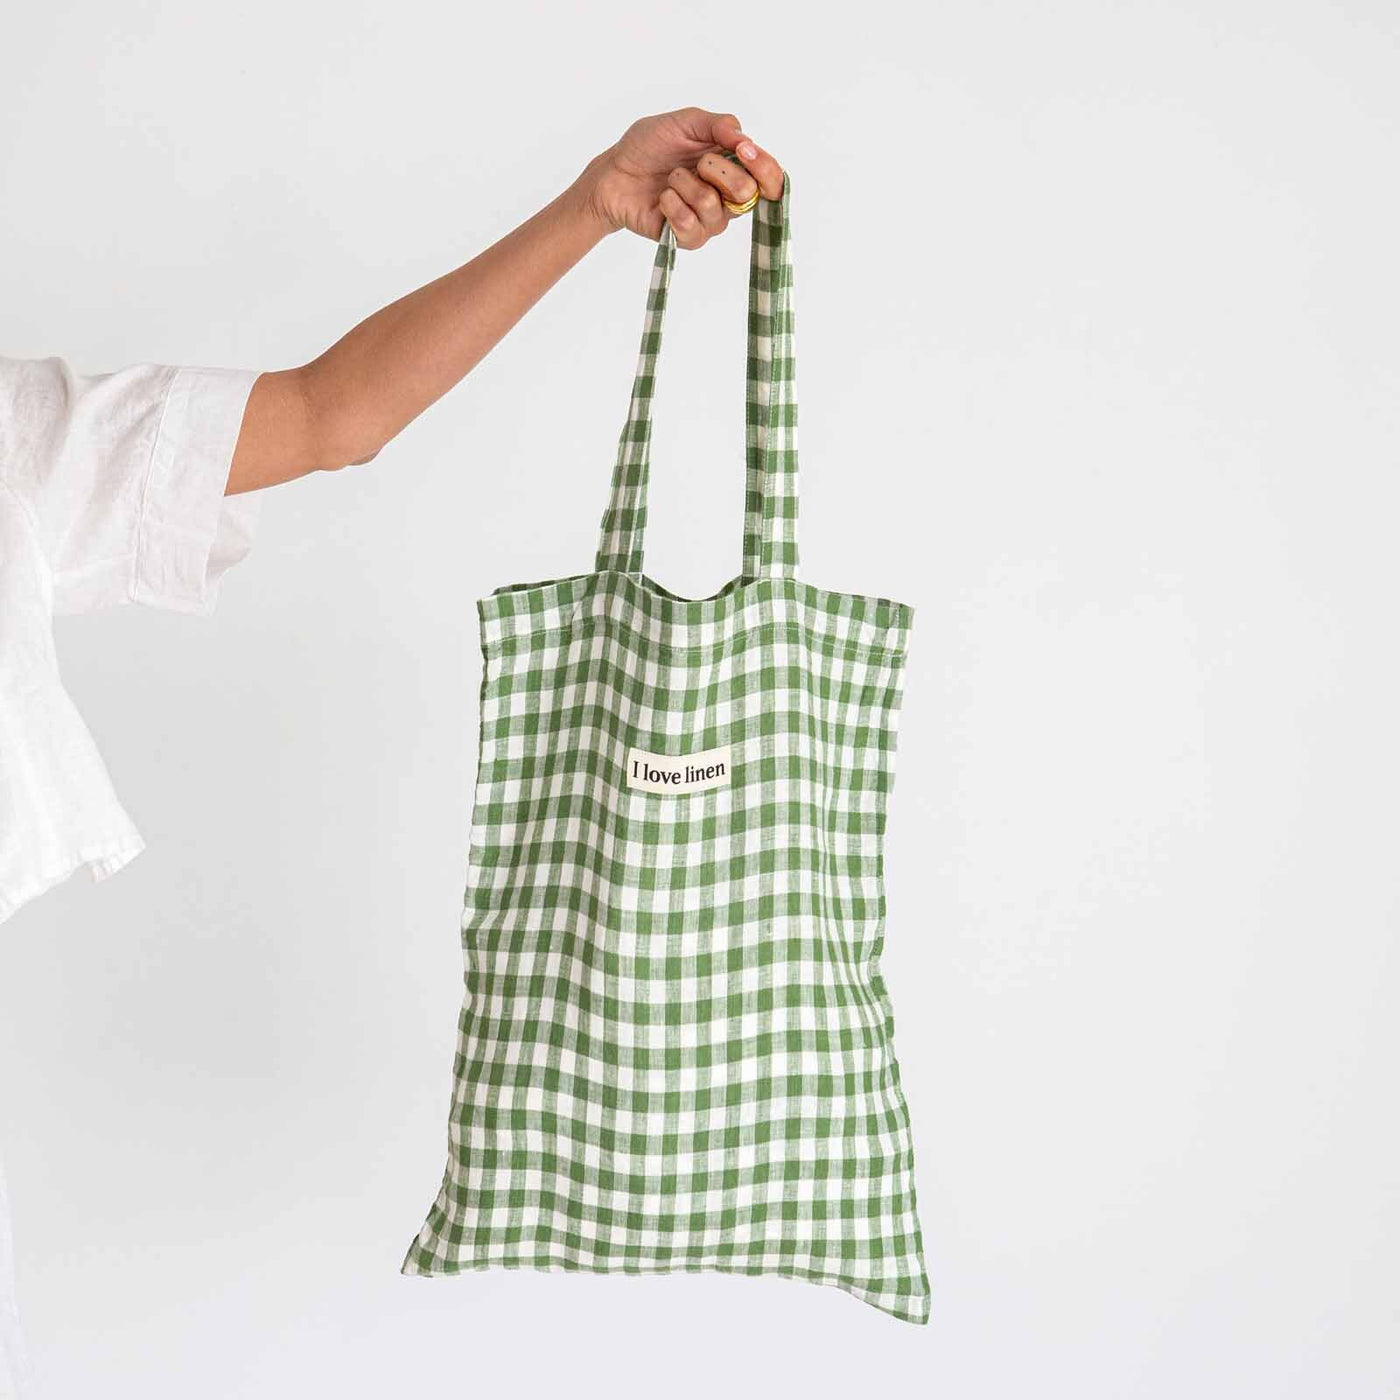 French Flax Linen Market Bag in Ivy Gingham